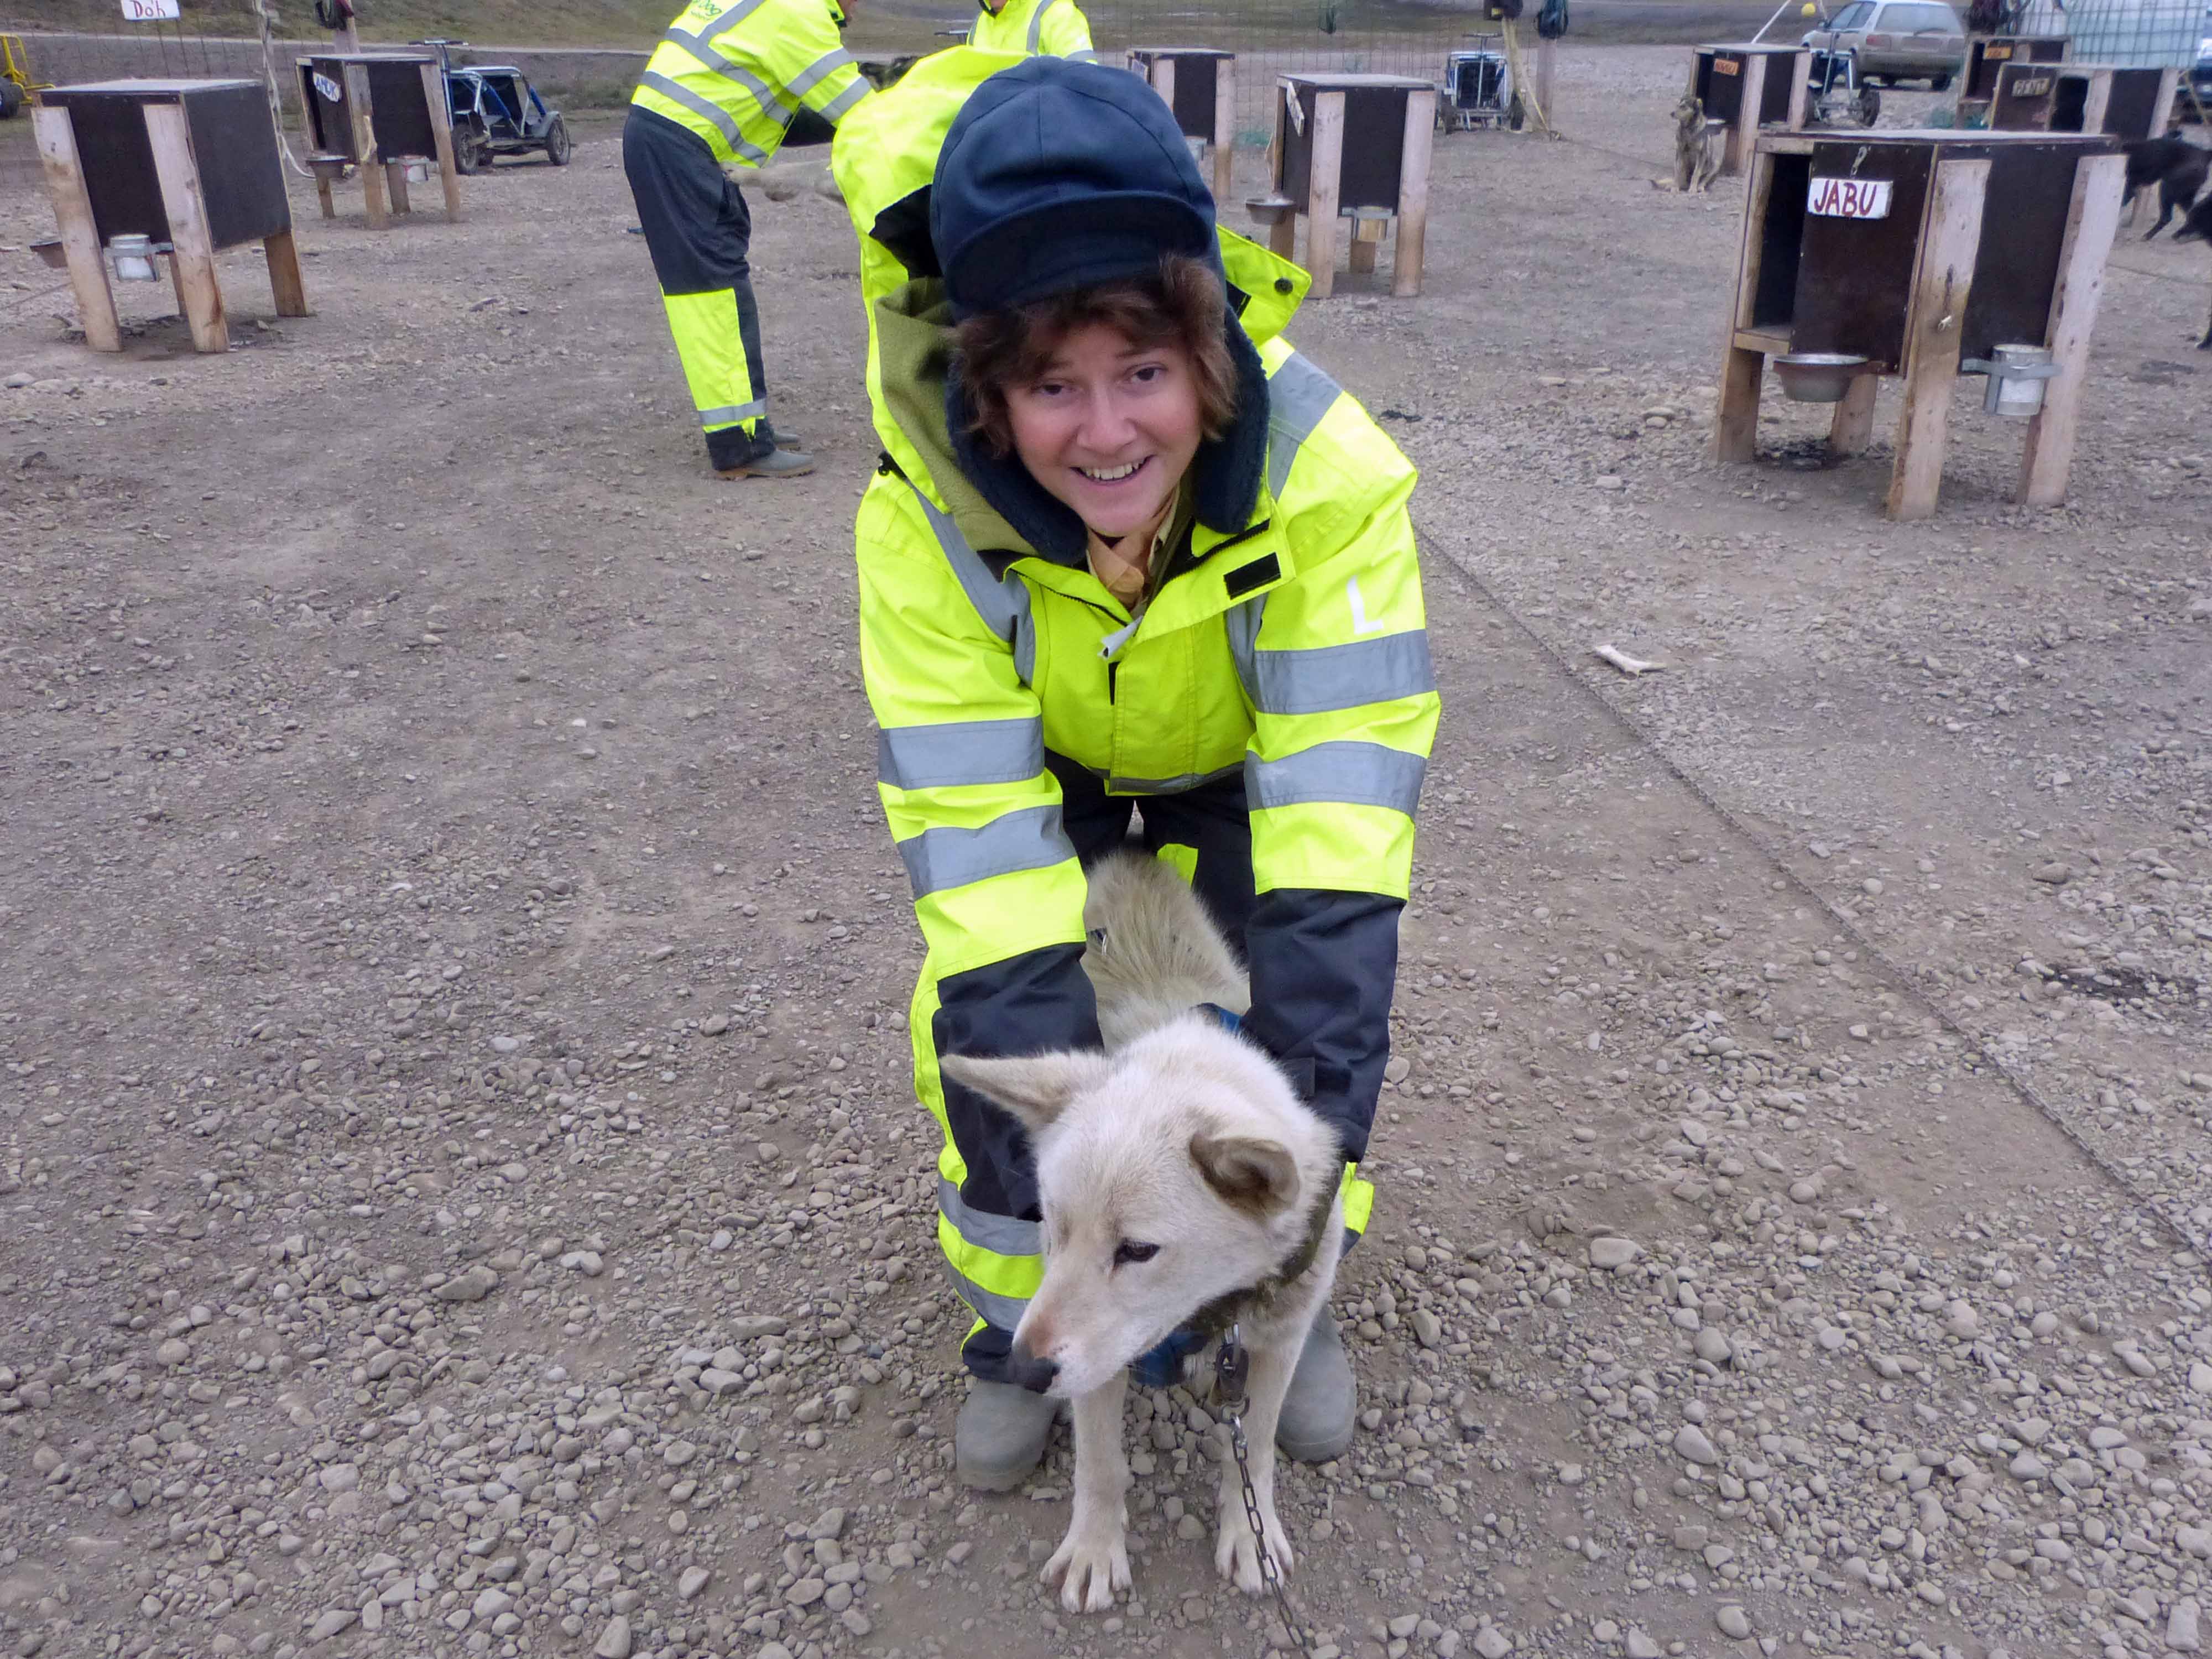 Wendy and Willow at Green Dog, Longyearbyen, Svalbard, Norway